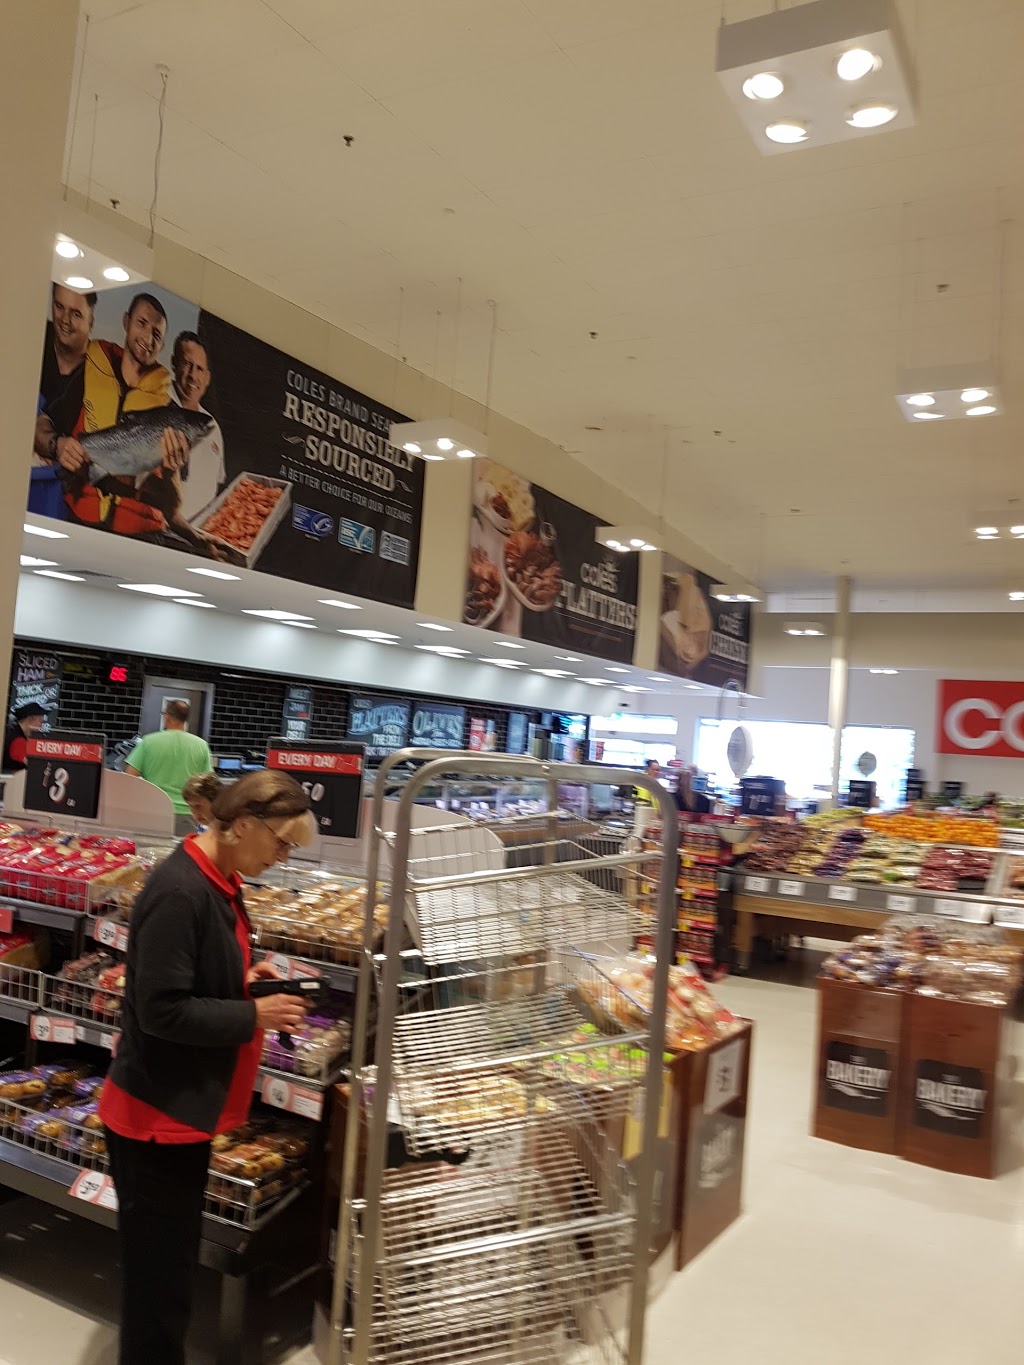 Coles Hastings | supermarket | Victoria St &, Church St, Hastings VIC 3915, Australia | 0359791700 OR +61 3 5979 1700